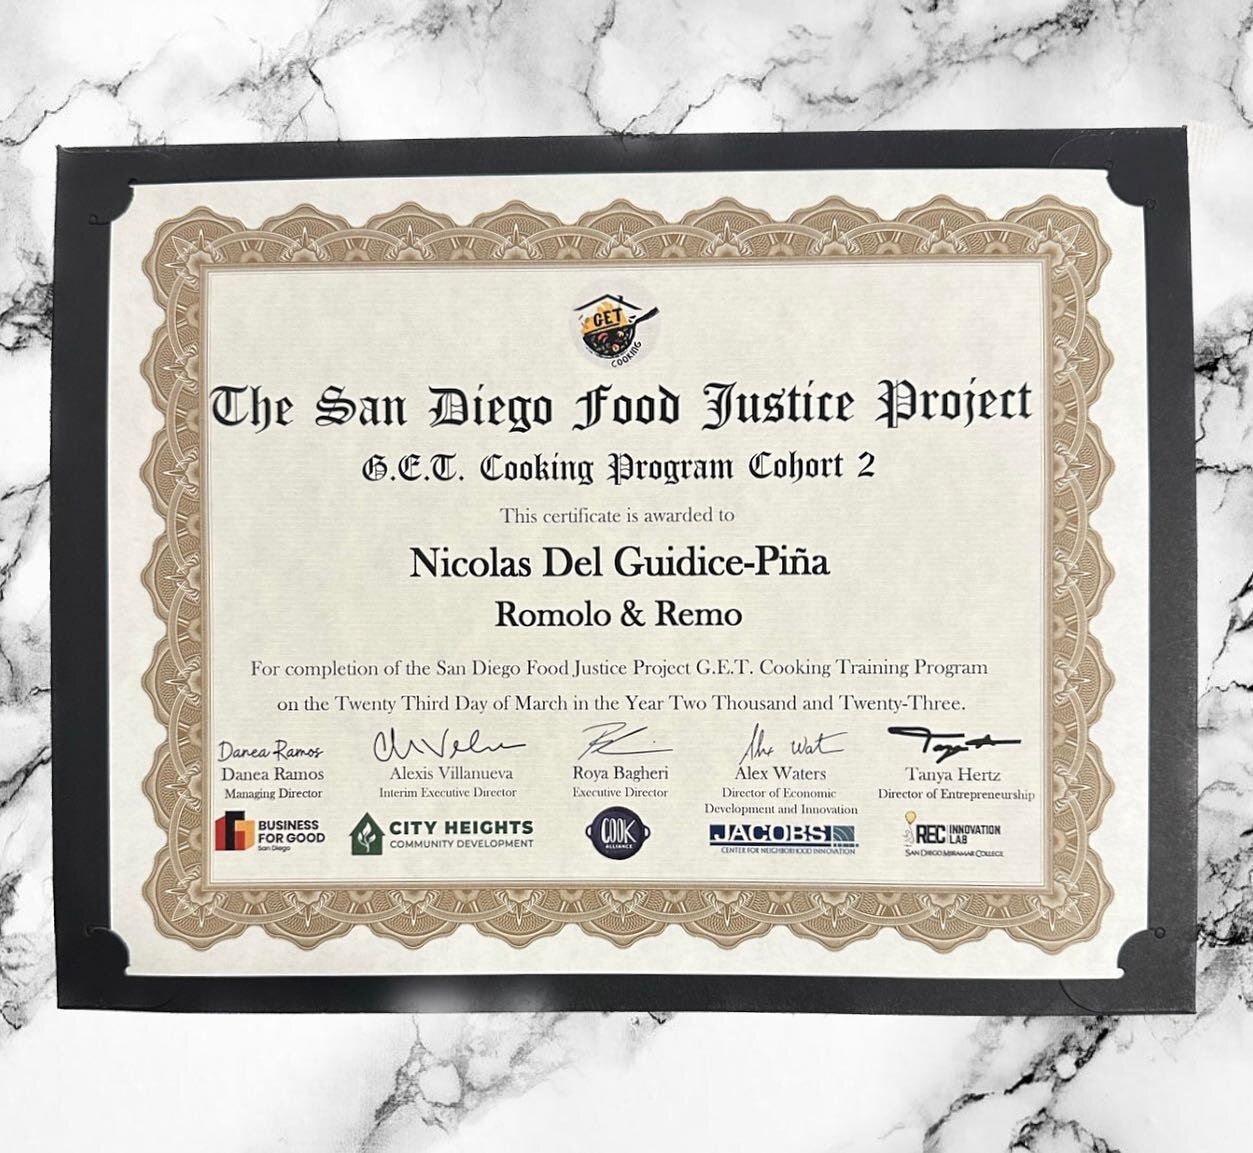 We&rsquo;re over the moon to announce we are graduates and recipients of the San Diego Food Justice Project G.E.T Cooking Grant! Extremely honored to have been selected, it was an amazing experience working with sooooo many talented individuals! 🥲🫶